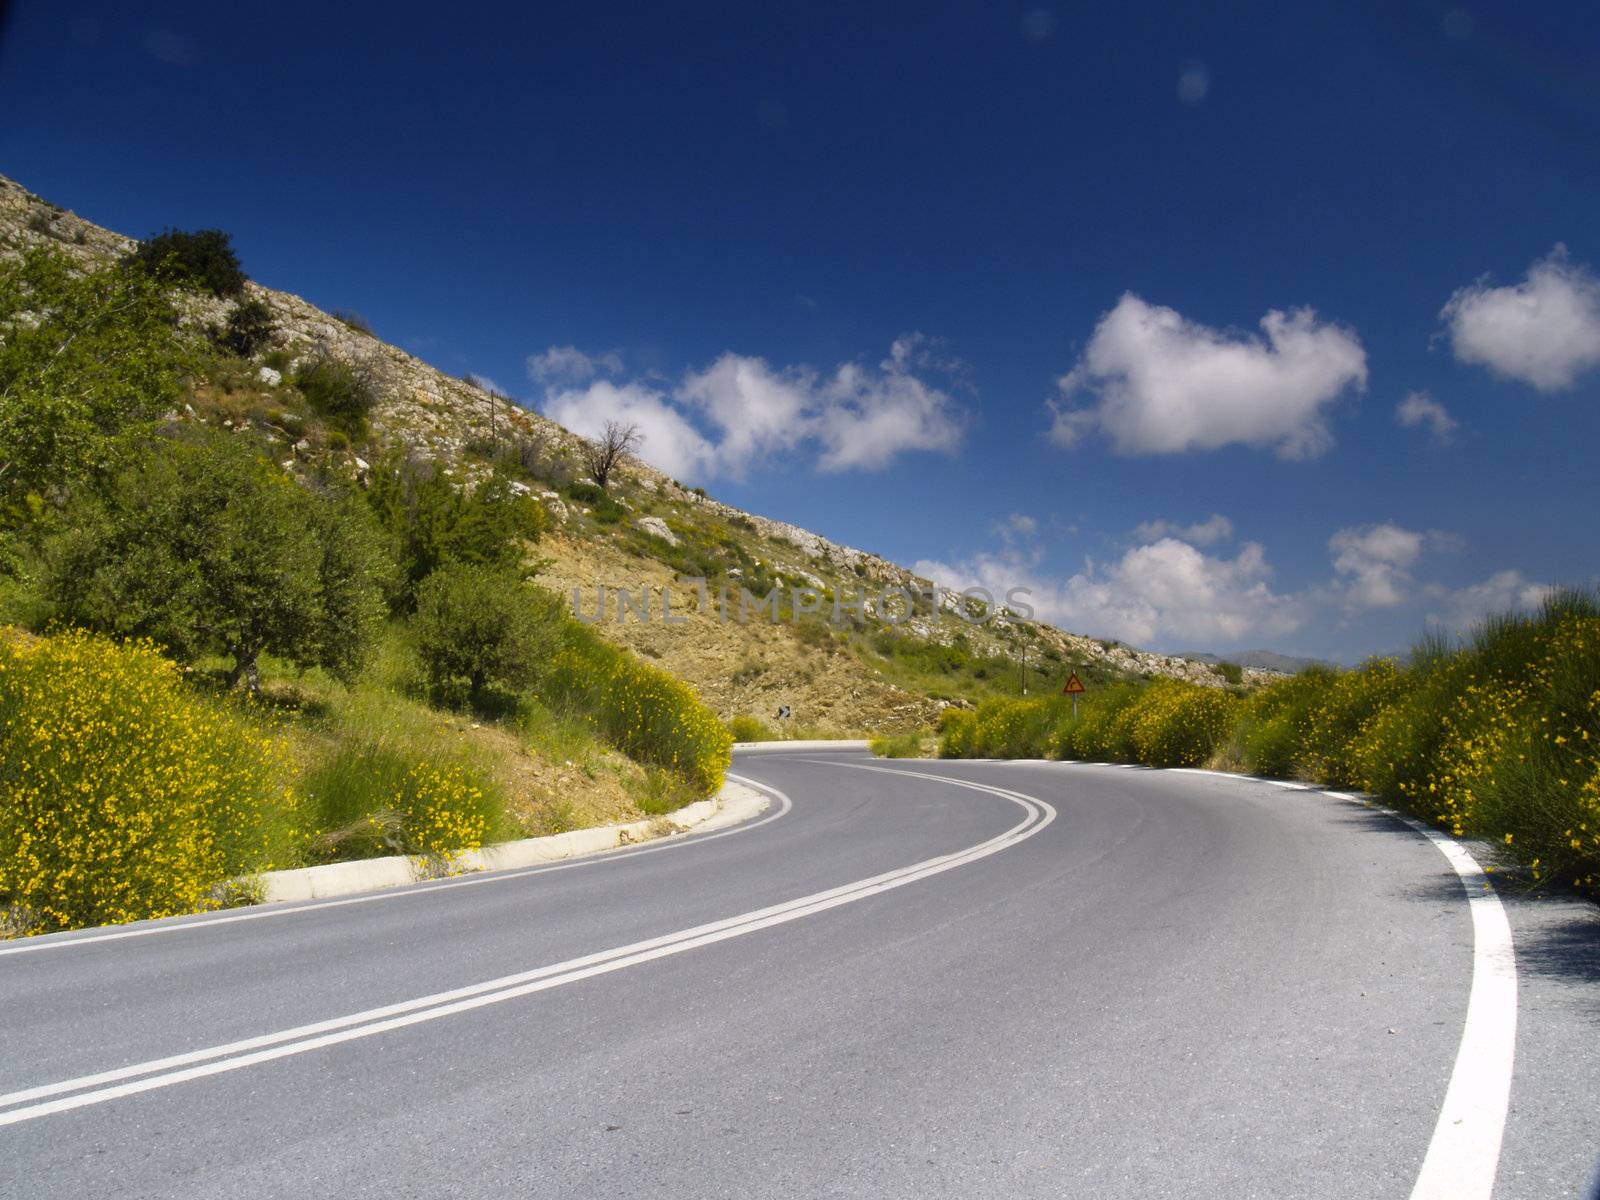 road in cretan mountains on a bright sunny day